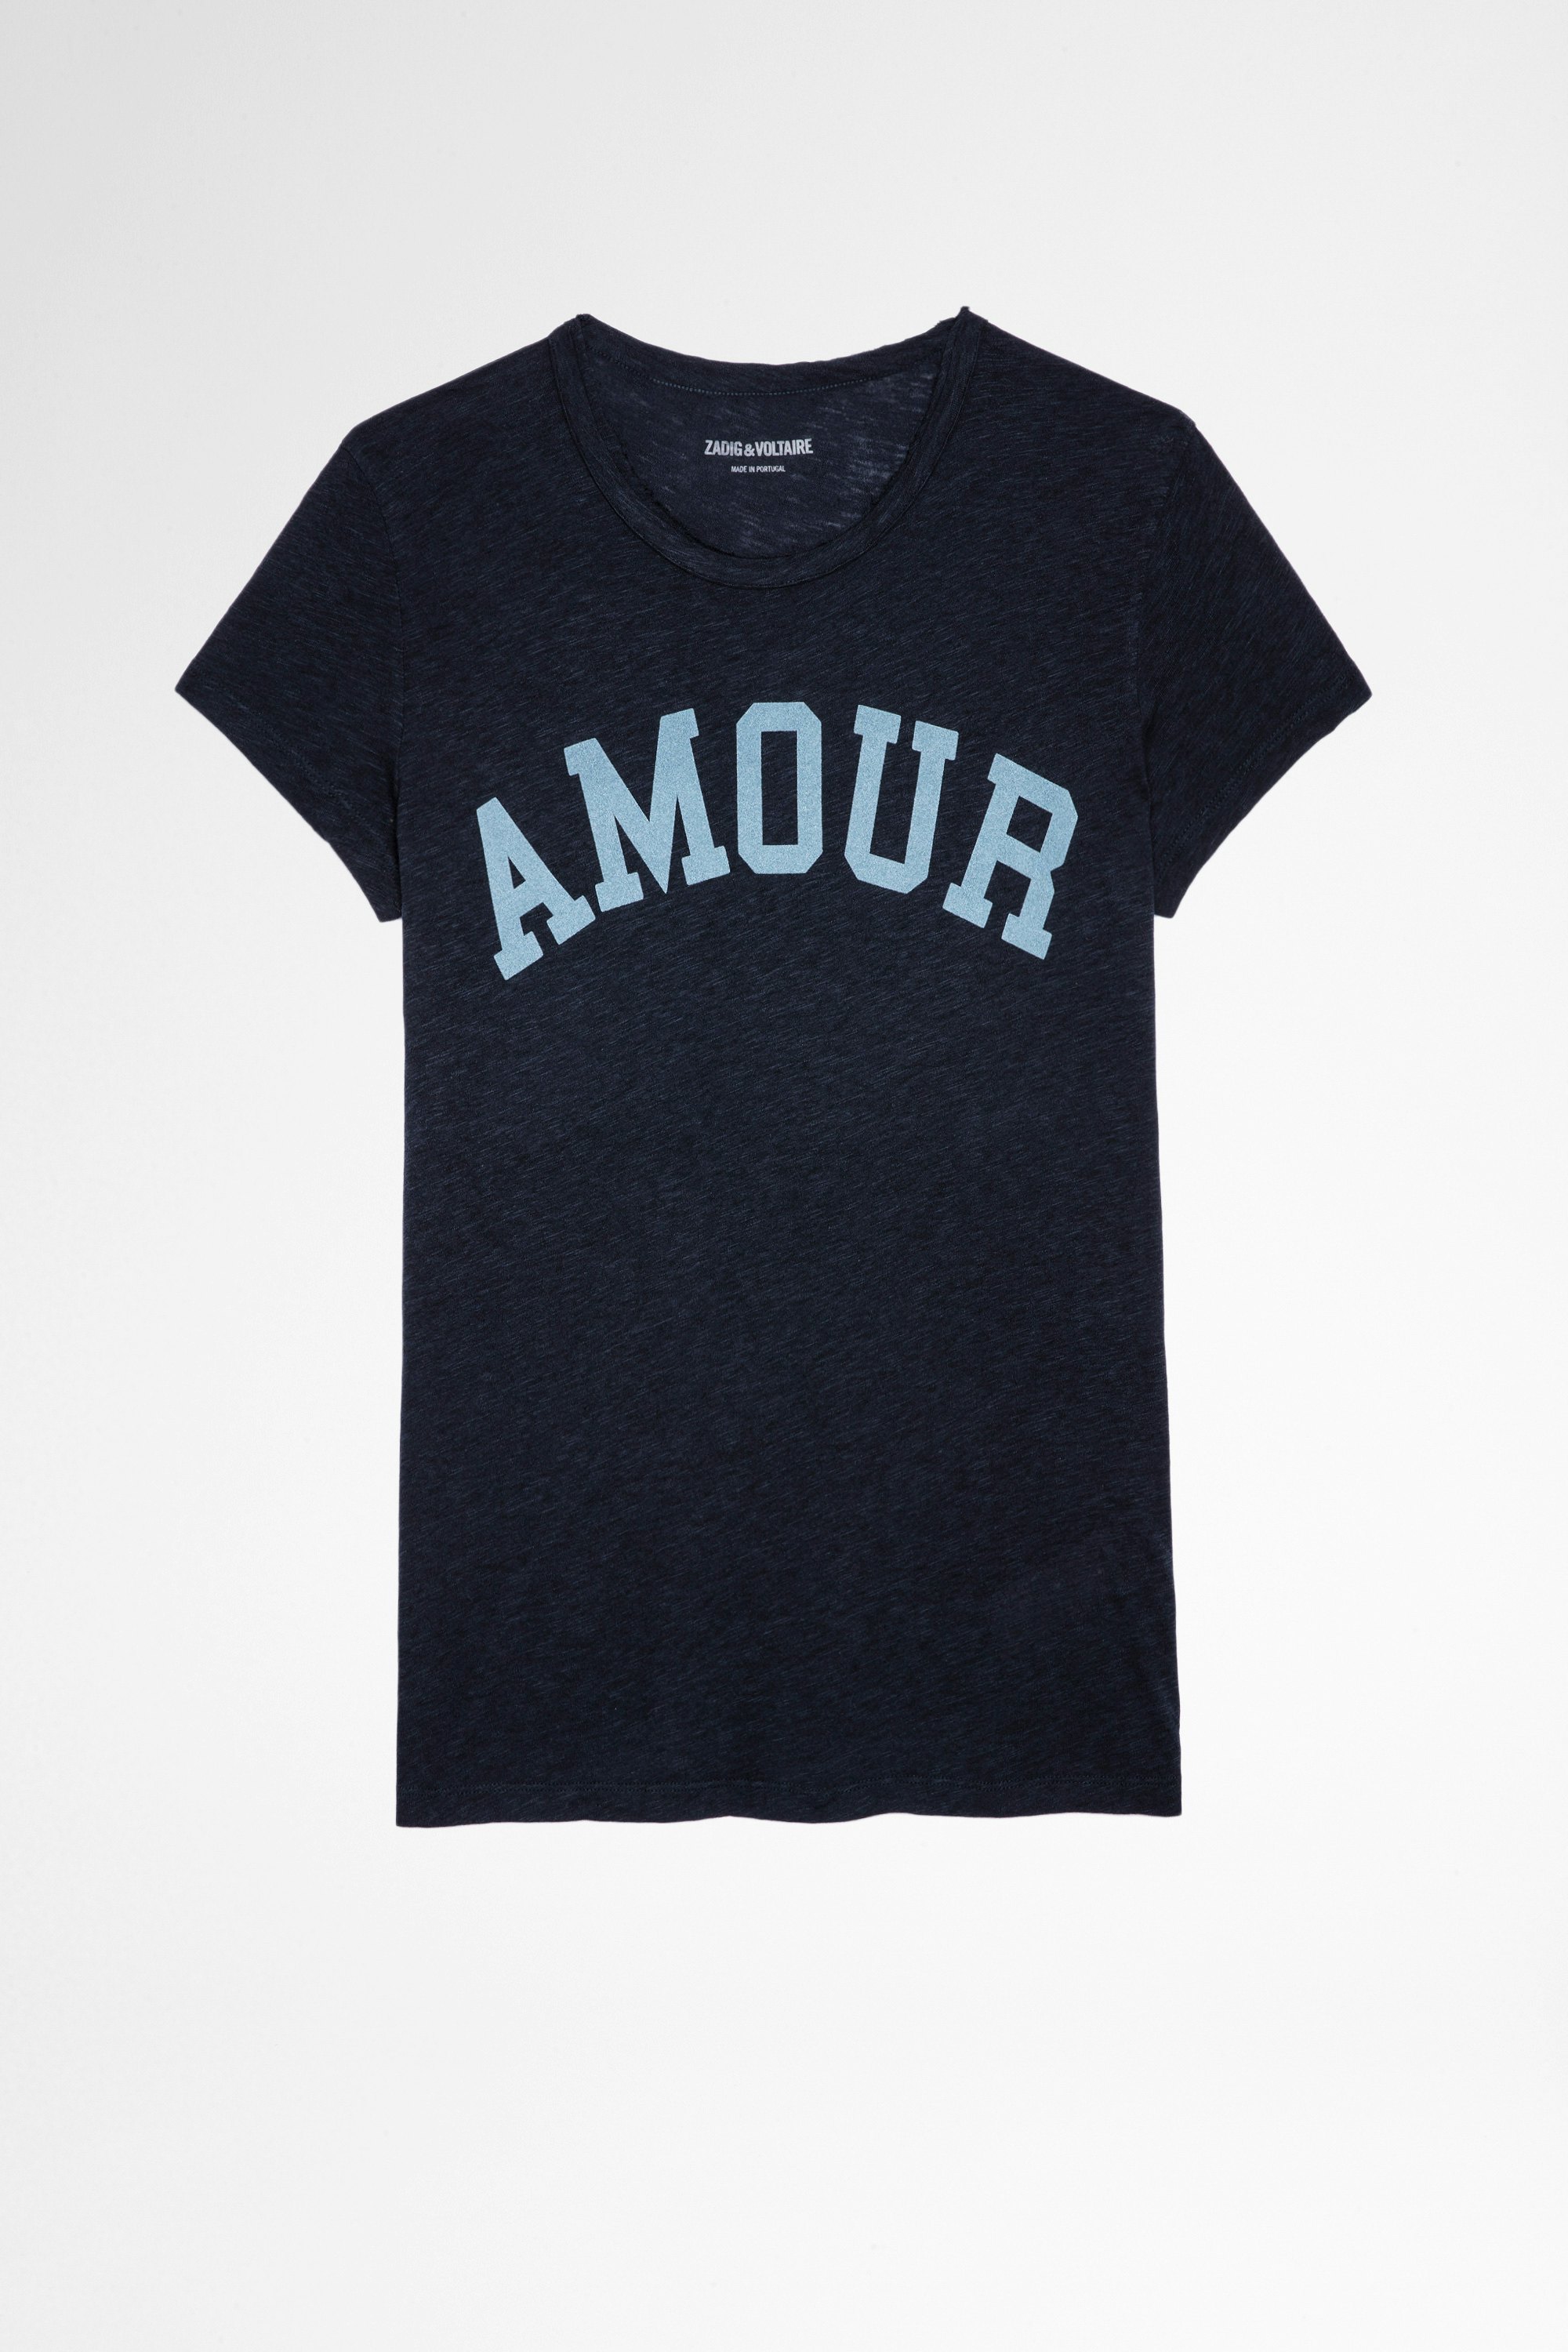 Walk Amour T-shirt Women's cotton and viscose T-shirt in navy blue 